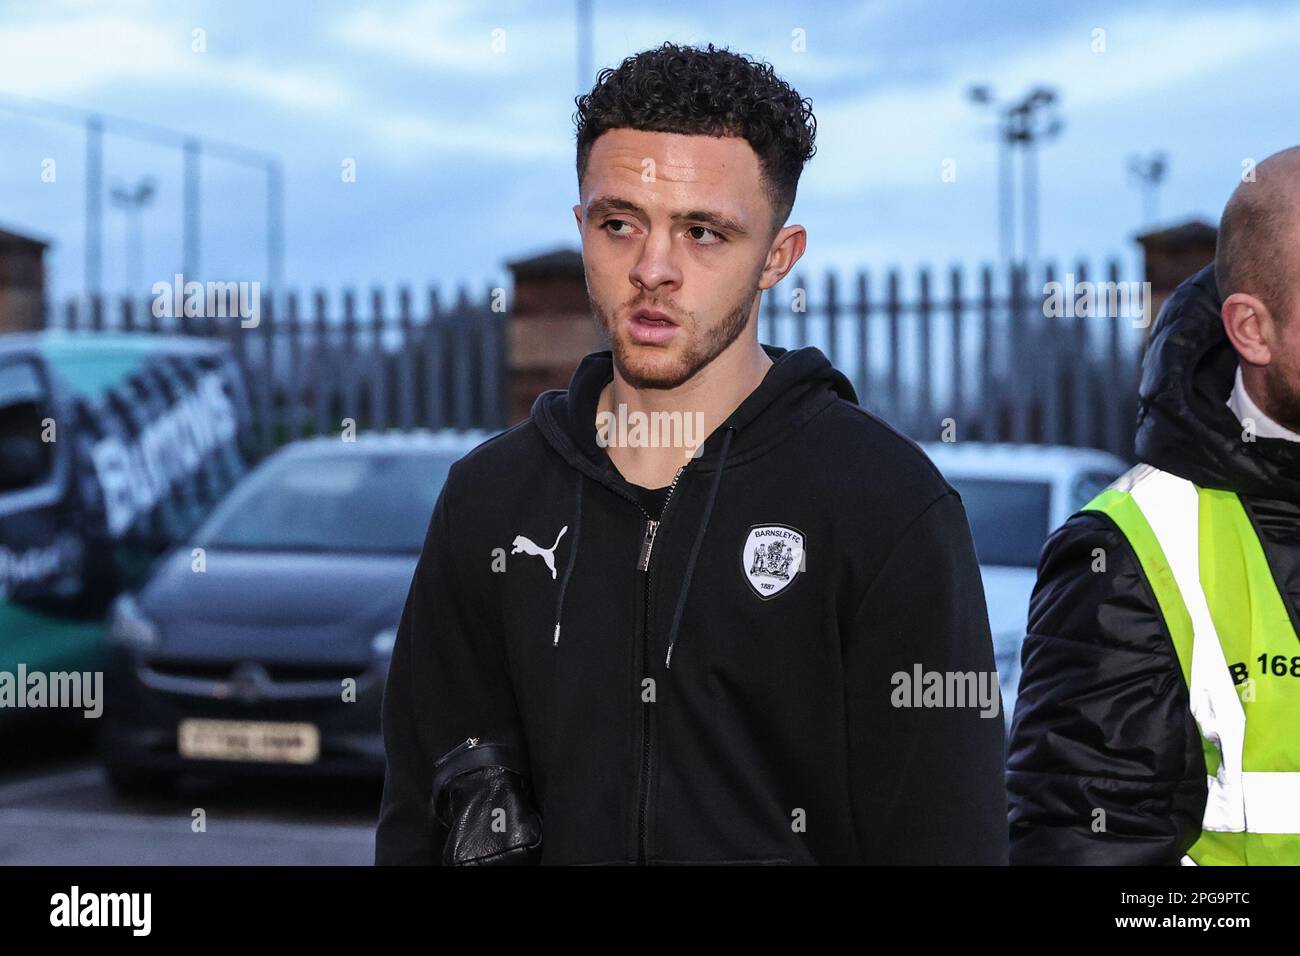 Jordan Williams #2 of Barnsley arrives during the Sky Bet League 1 match Barnsley vs Sheffield Wednesday at Oakwell, Barnsley, United Kingdom, 21st March 2023  (Photo by Mark Cosgrove/News Images) Stock Photo